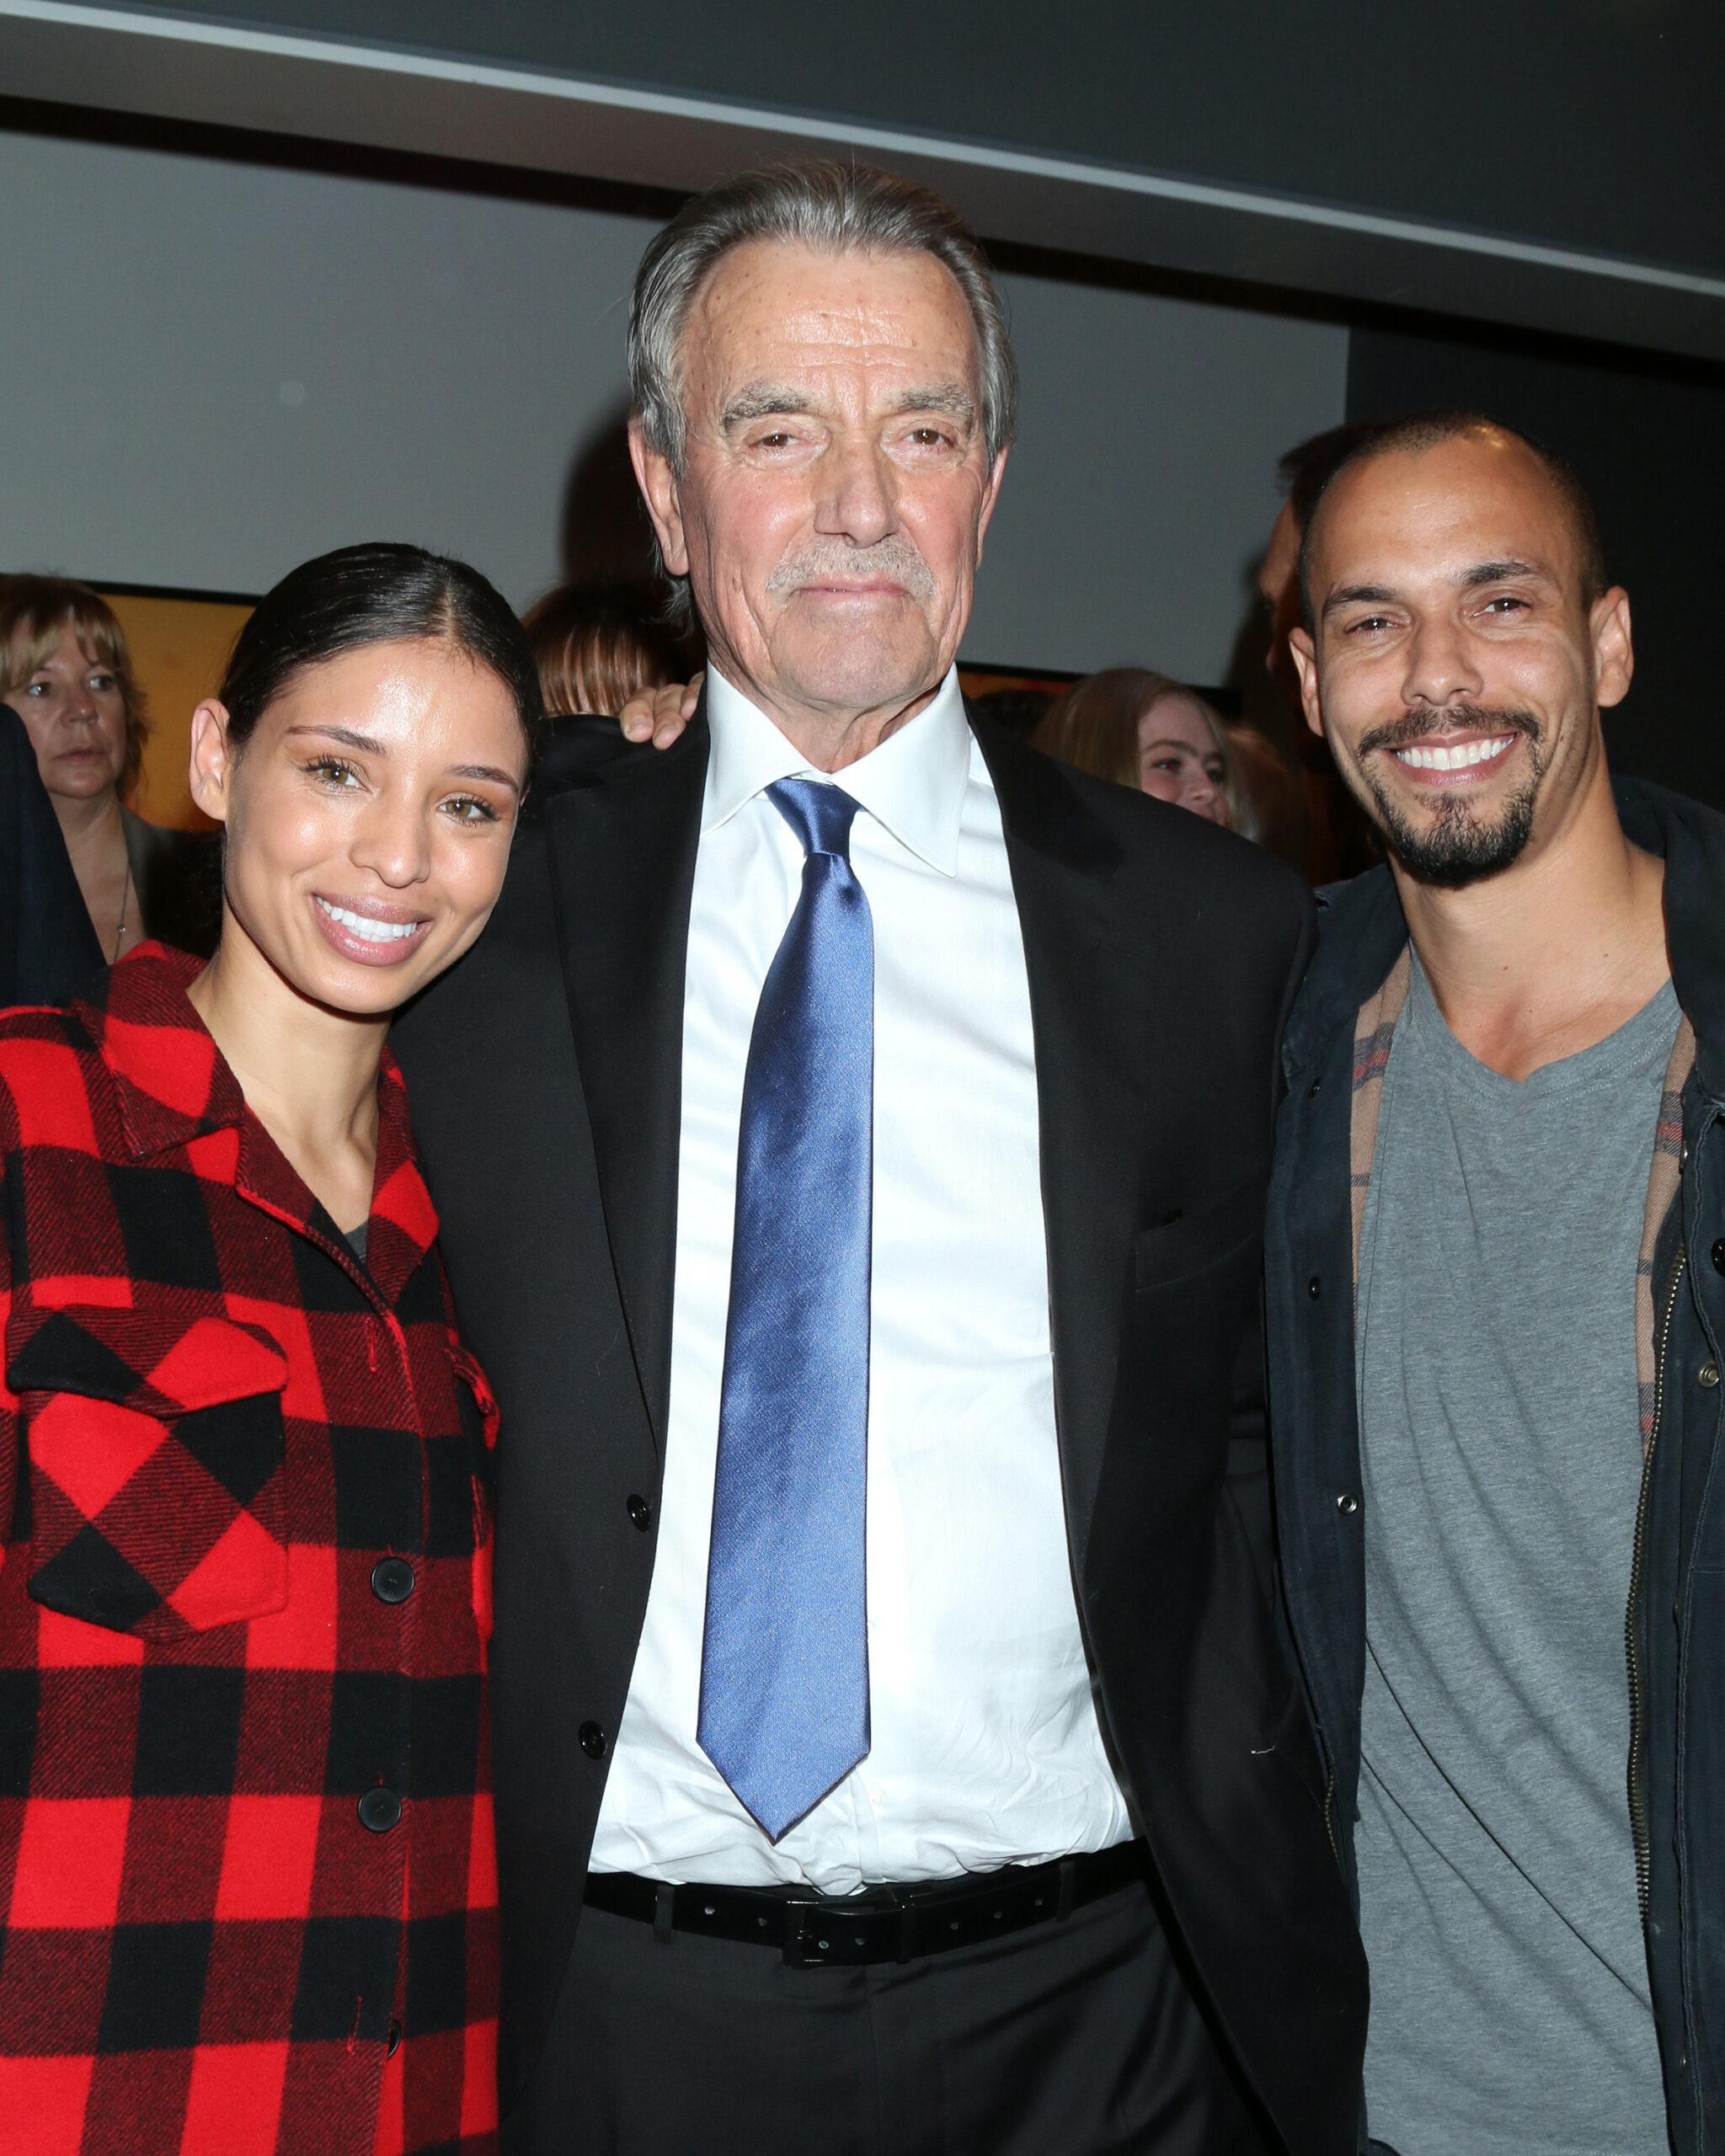 Brytni Sarpy, Eric Braeden, and Bryton James at the Eric Braeden 40th Anniversary Celebration on The Young and The Restless at the Television City on February 7, 2020 in Los Angeles, CA